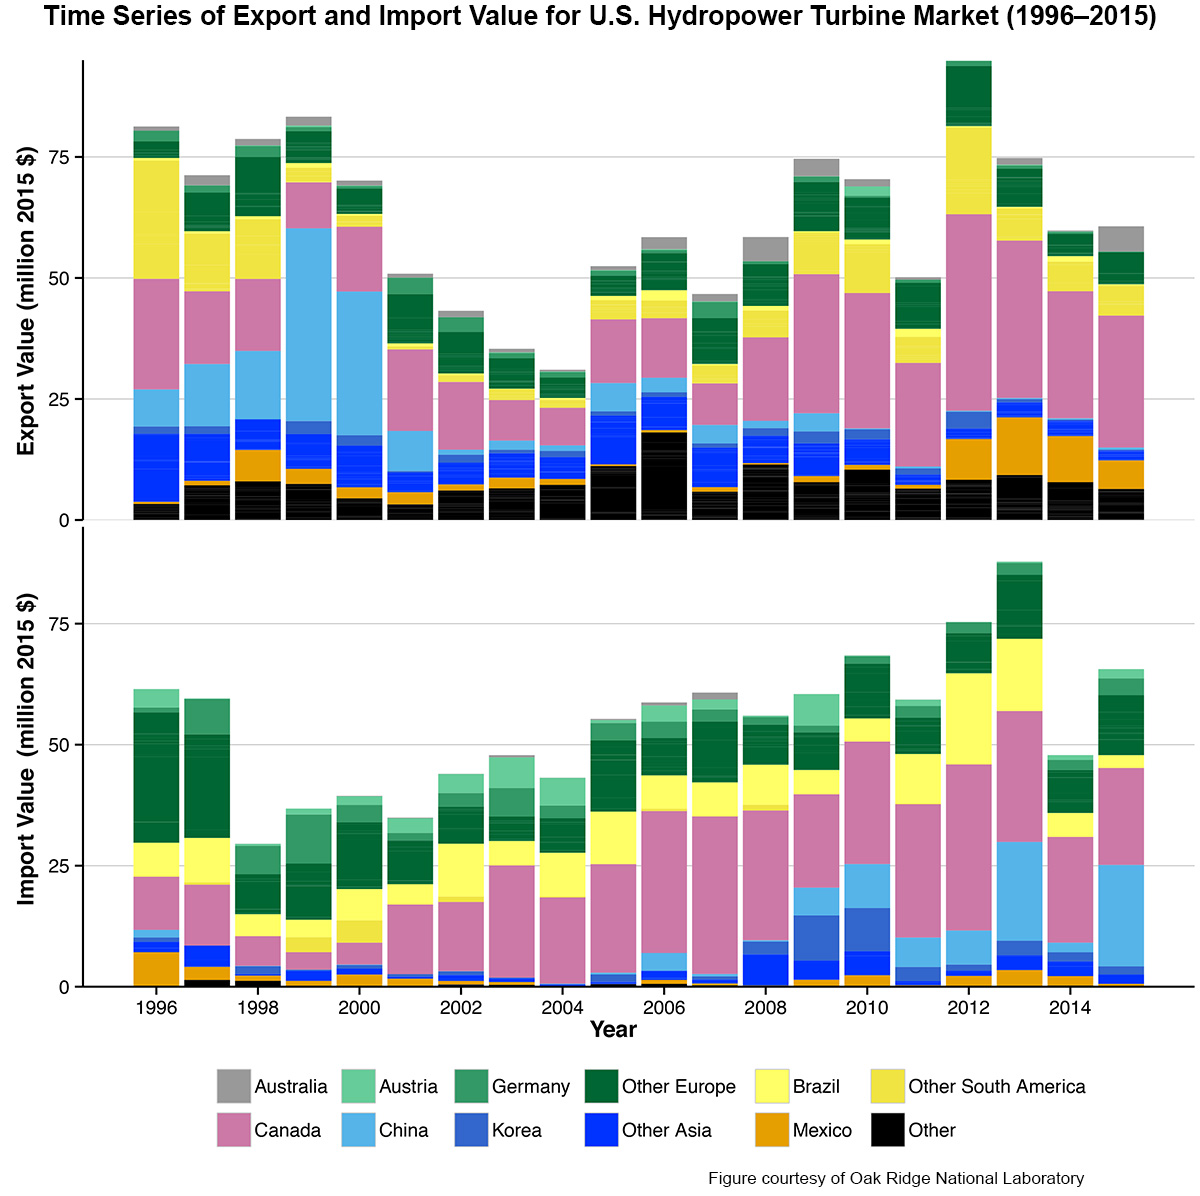 Chart showing export and import values in dollars for U.S. hydropower turbine market for several countries over years 1996-2015.